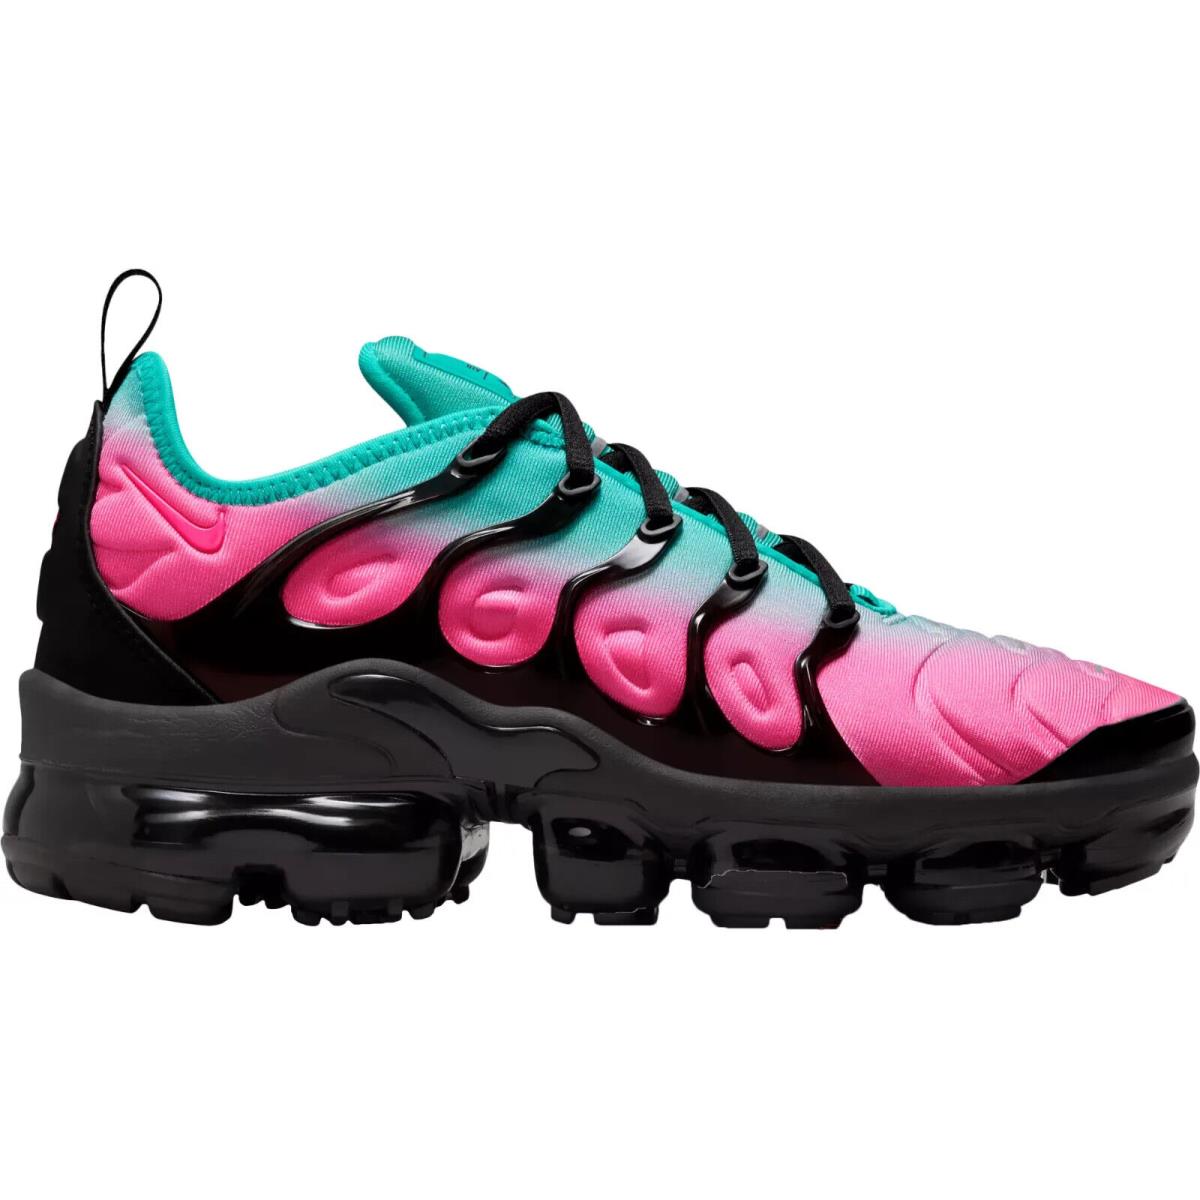 Nike Air Vapormax Plus Women`s Running Shoes All Colors US Sizes 6-11 Pink Blast/Black/Clear Jade